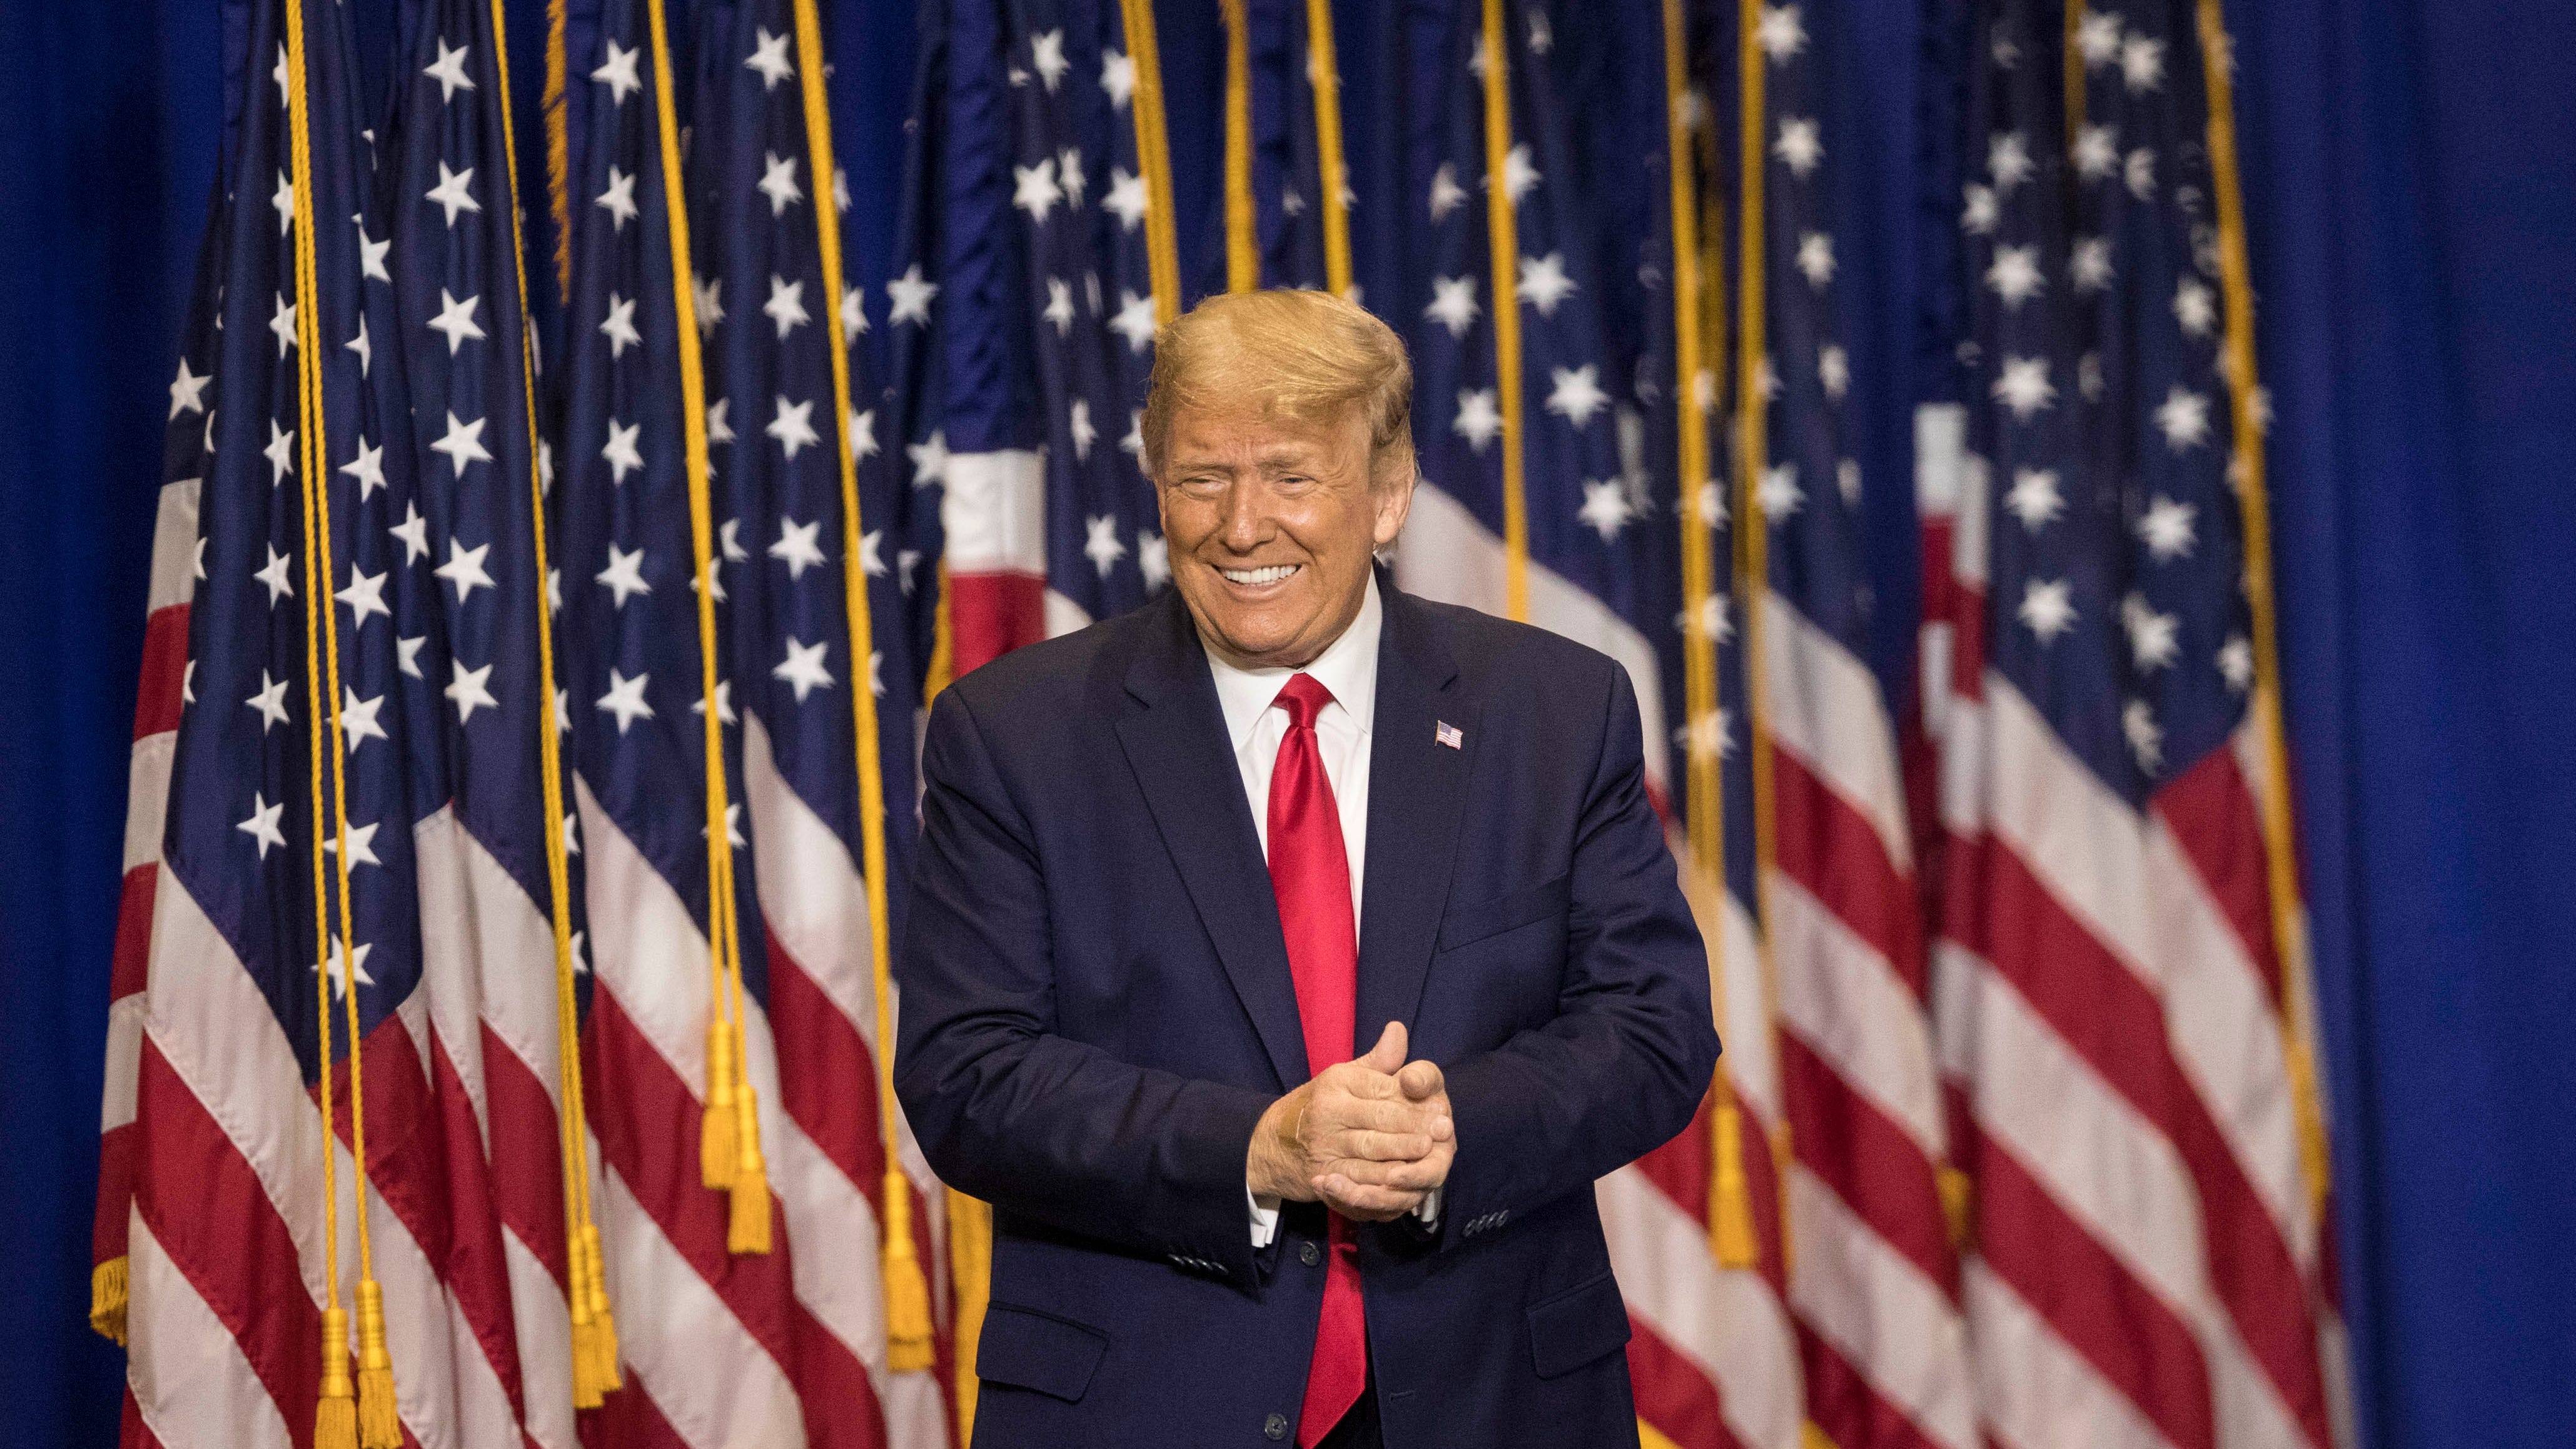 President Donald Trump enters the Caloosa Sound Convention Center and Amphitheater in downtown Fort Myers on Friday, October 16, 2020.